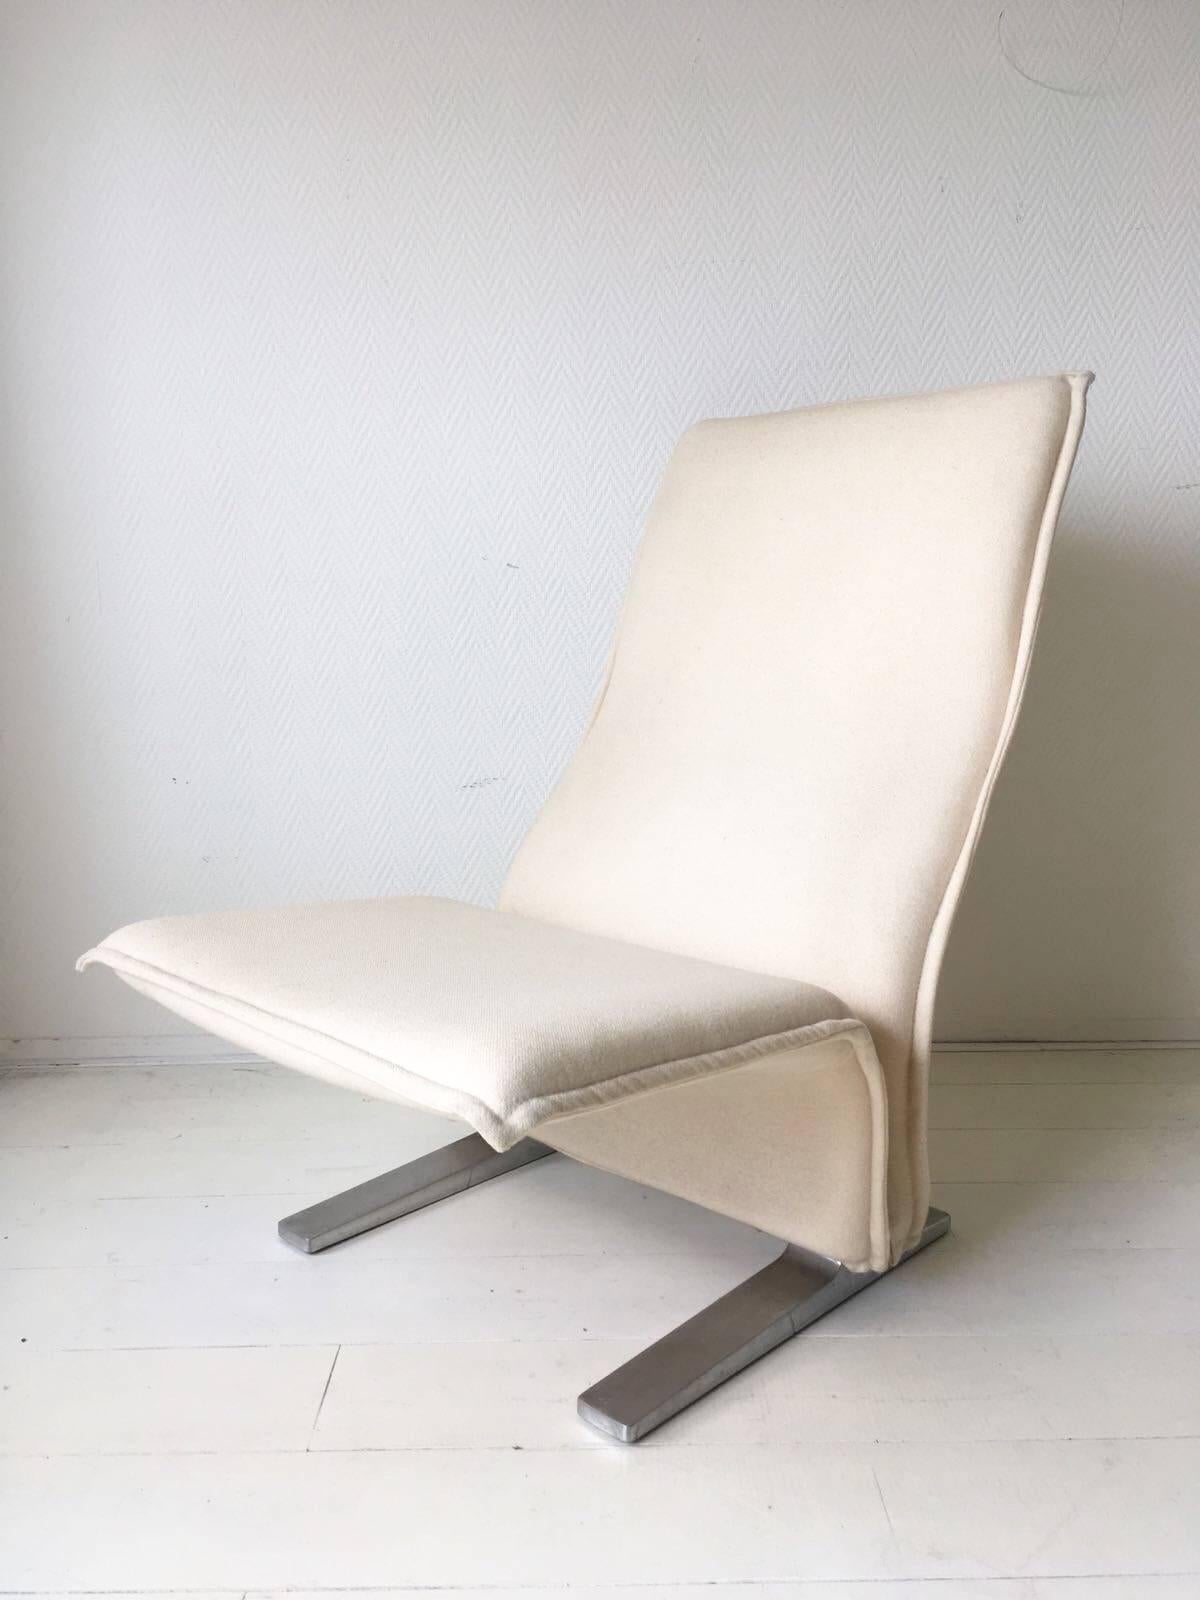 Iconic Artifort Concorde is a lounge chair without armrests. It was originally designed by Pierre Paulin for the airport waiting space of the French plane 'Concorde'. The chairs were named after this plane.
This offwhite colored chair features